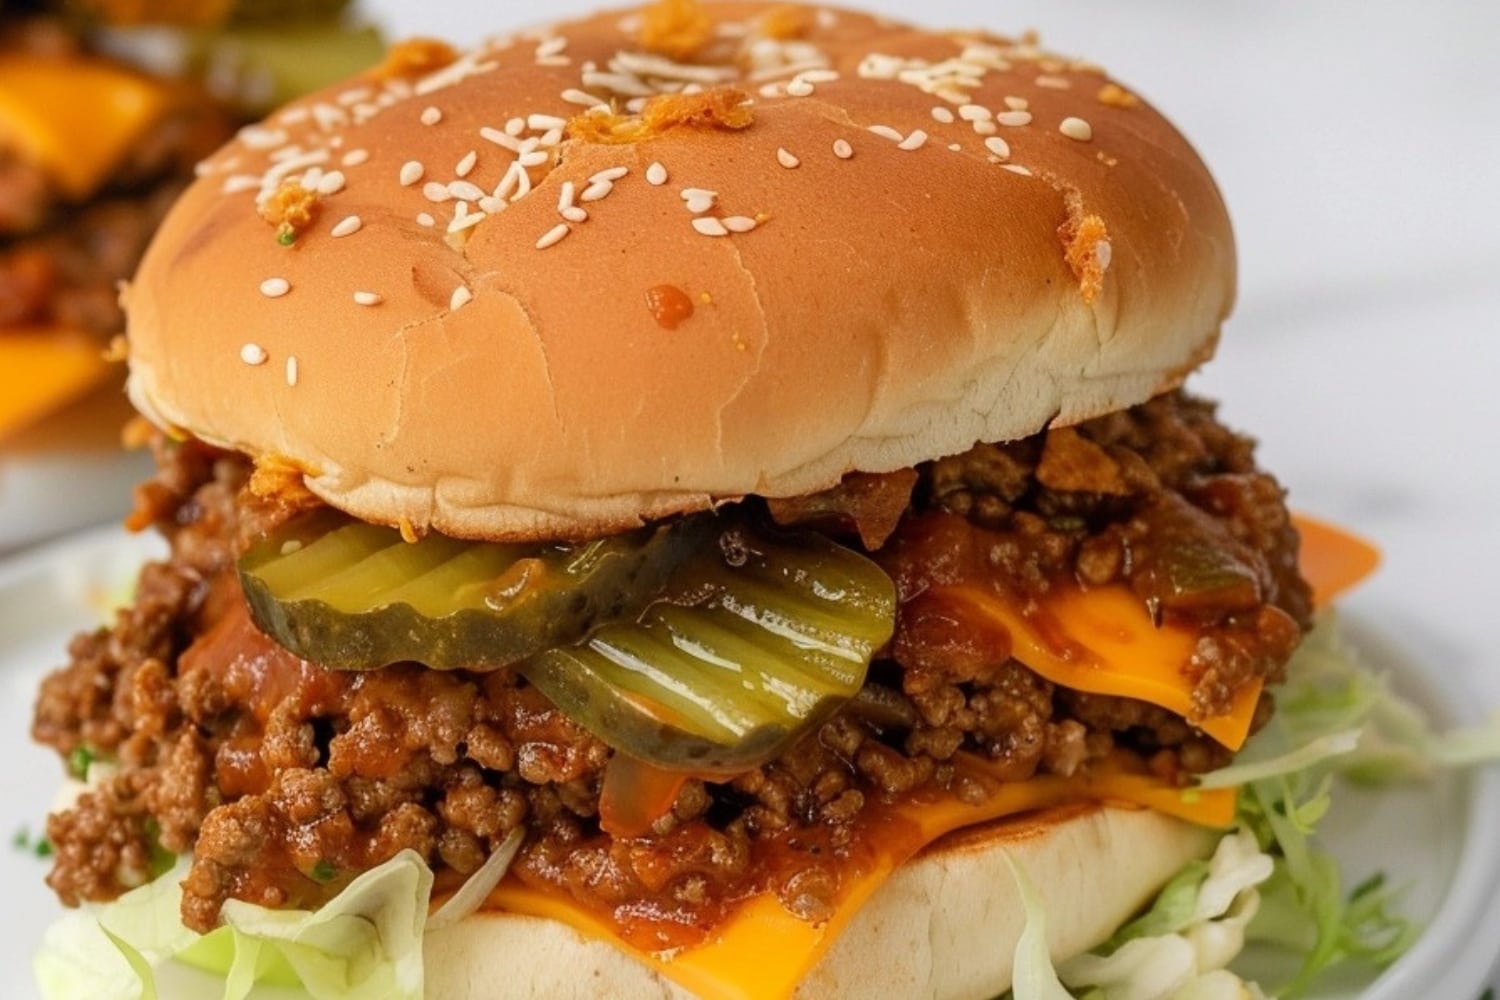 Cheesy Big Mac with ground beef, dill pickles, American cheese and shredded lettuce filling.